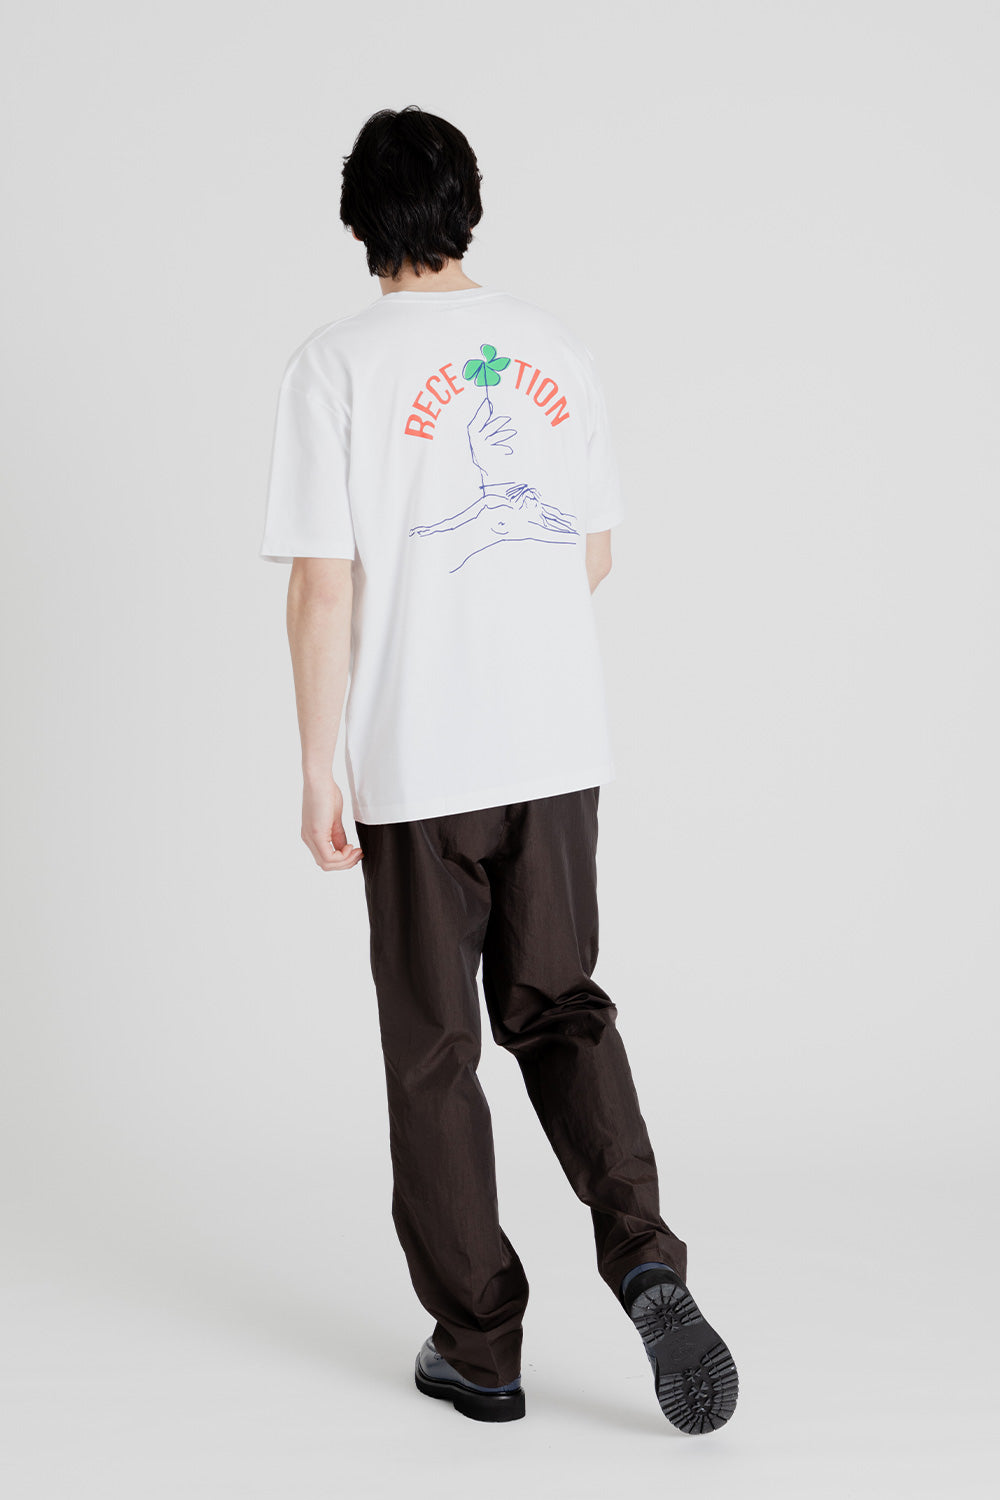 Reception Clothing SS Tee Oscar in White